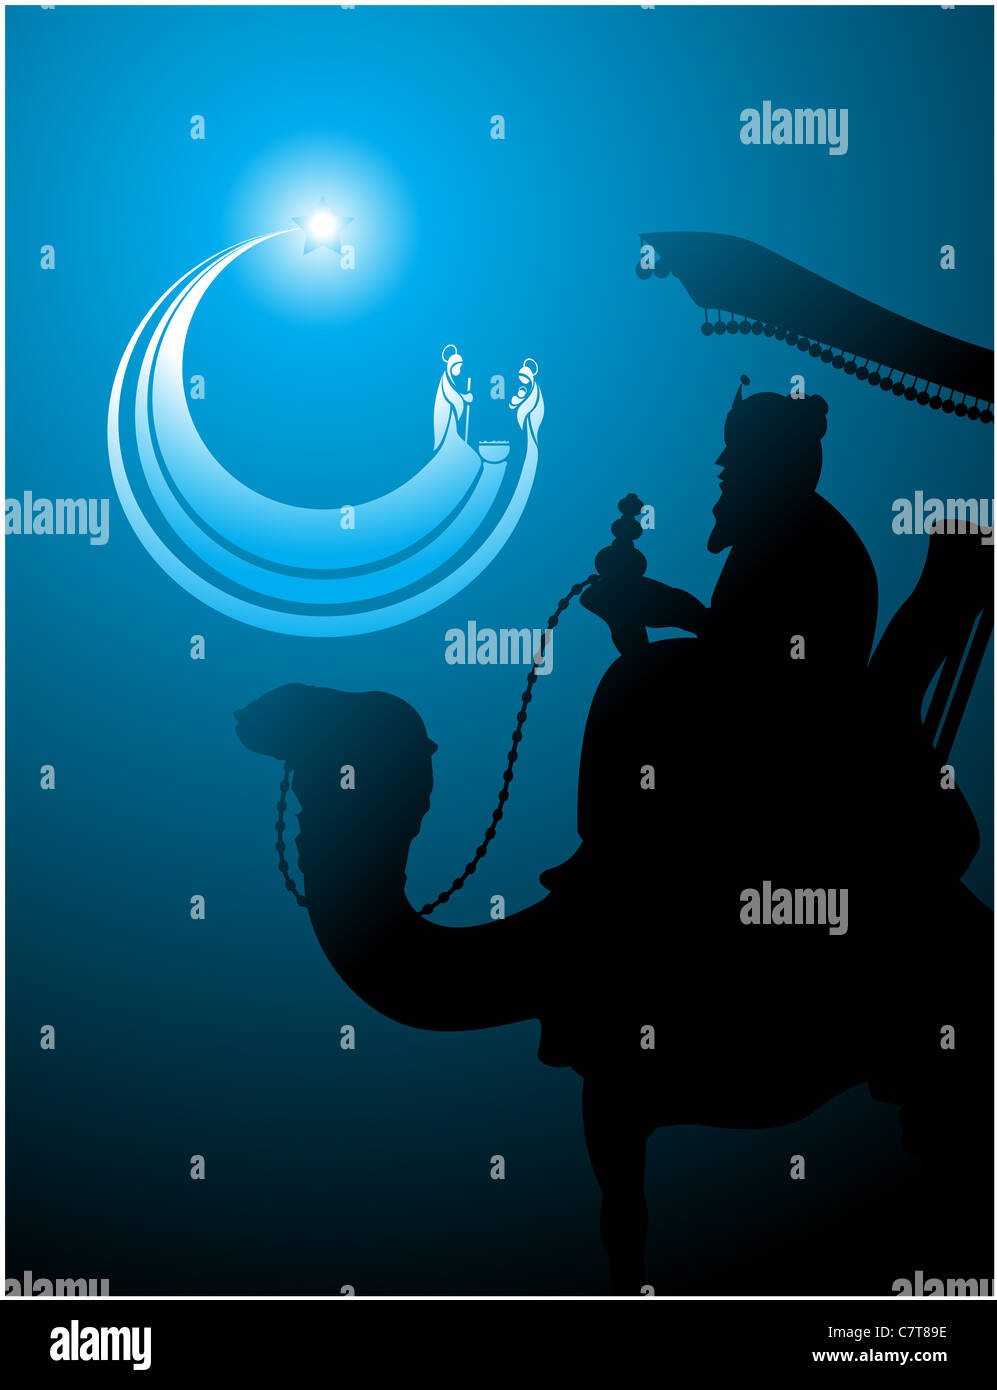 belen star shaped icon of the Nativity as the Wise Man is watching Stock Photo